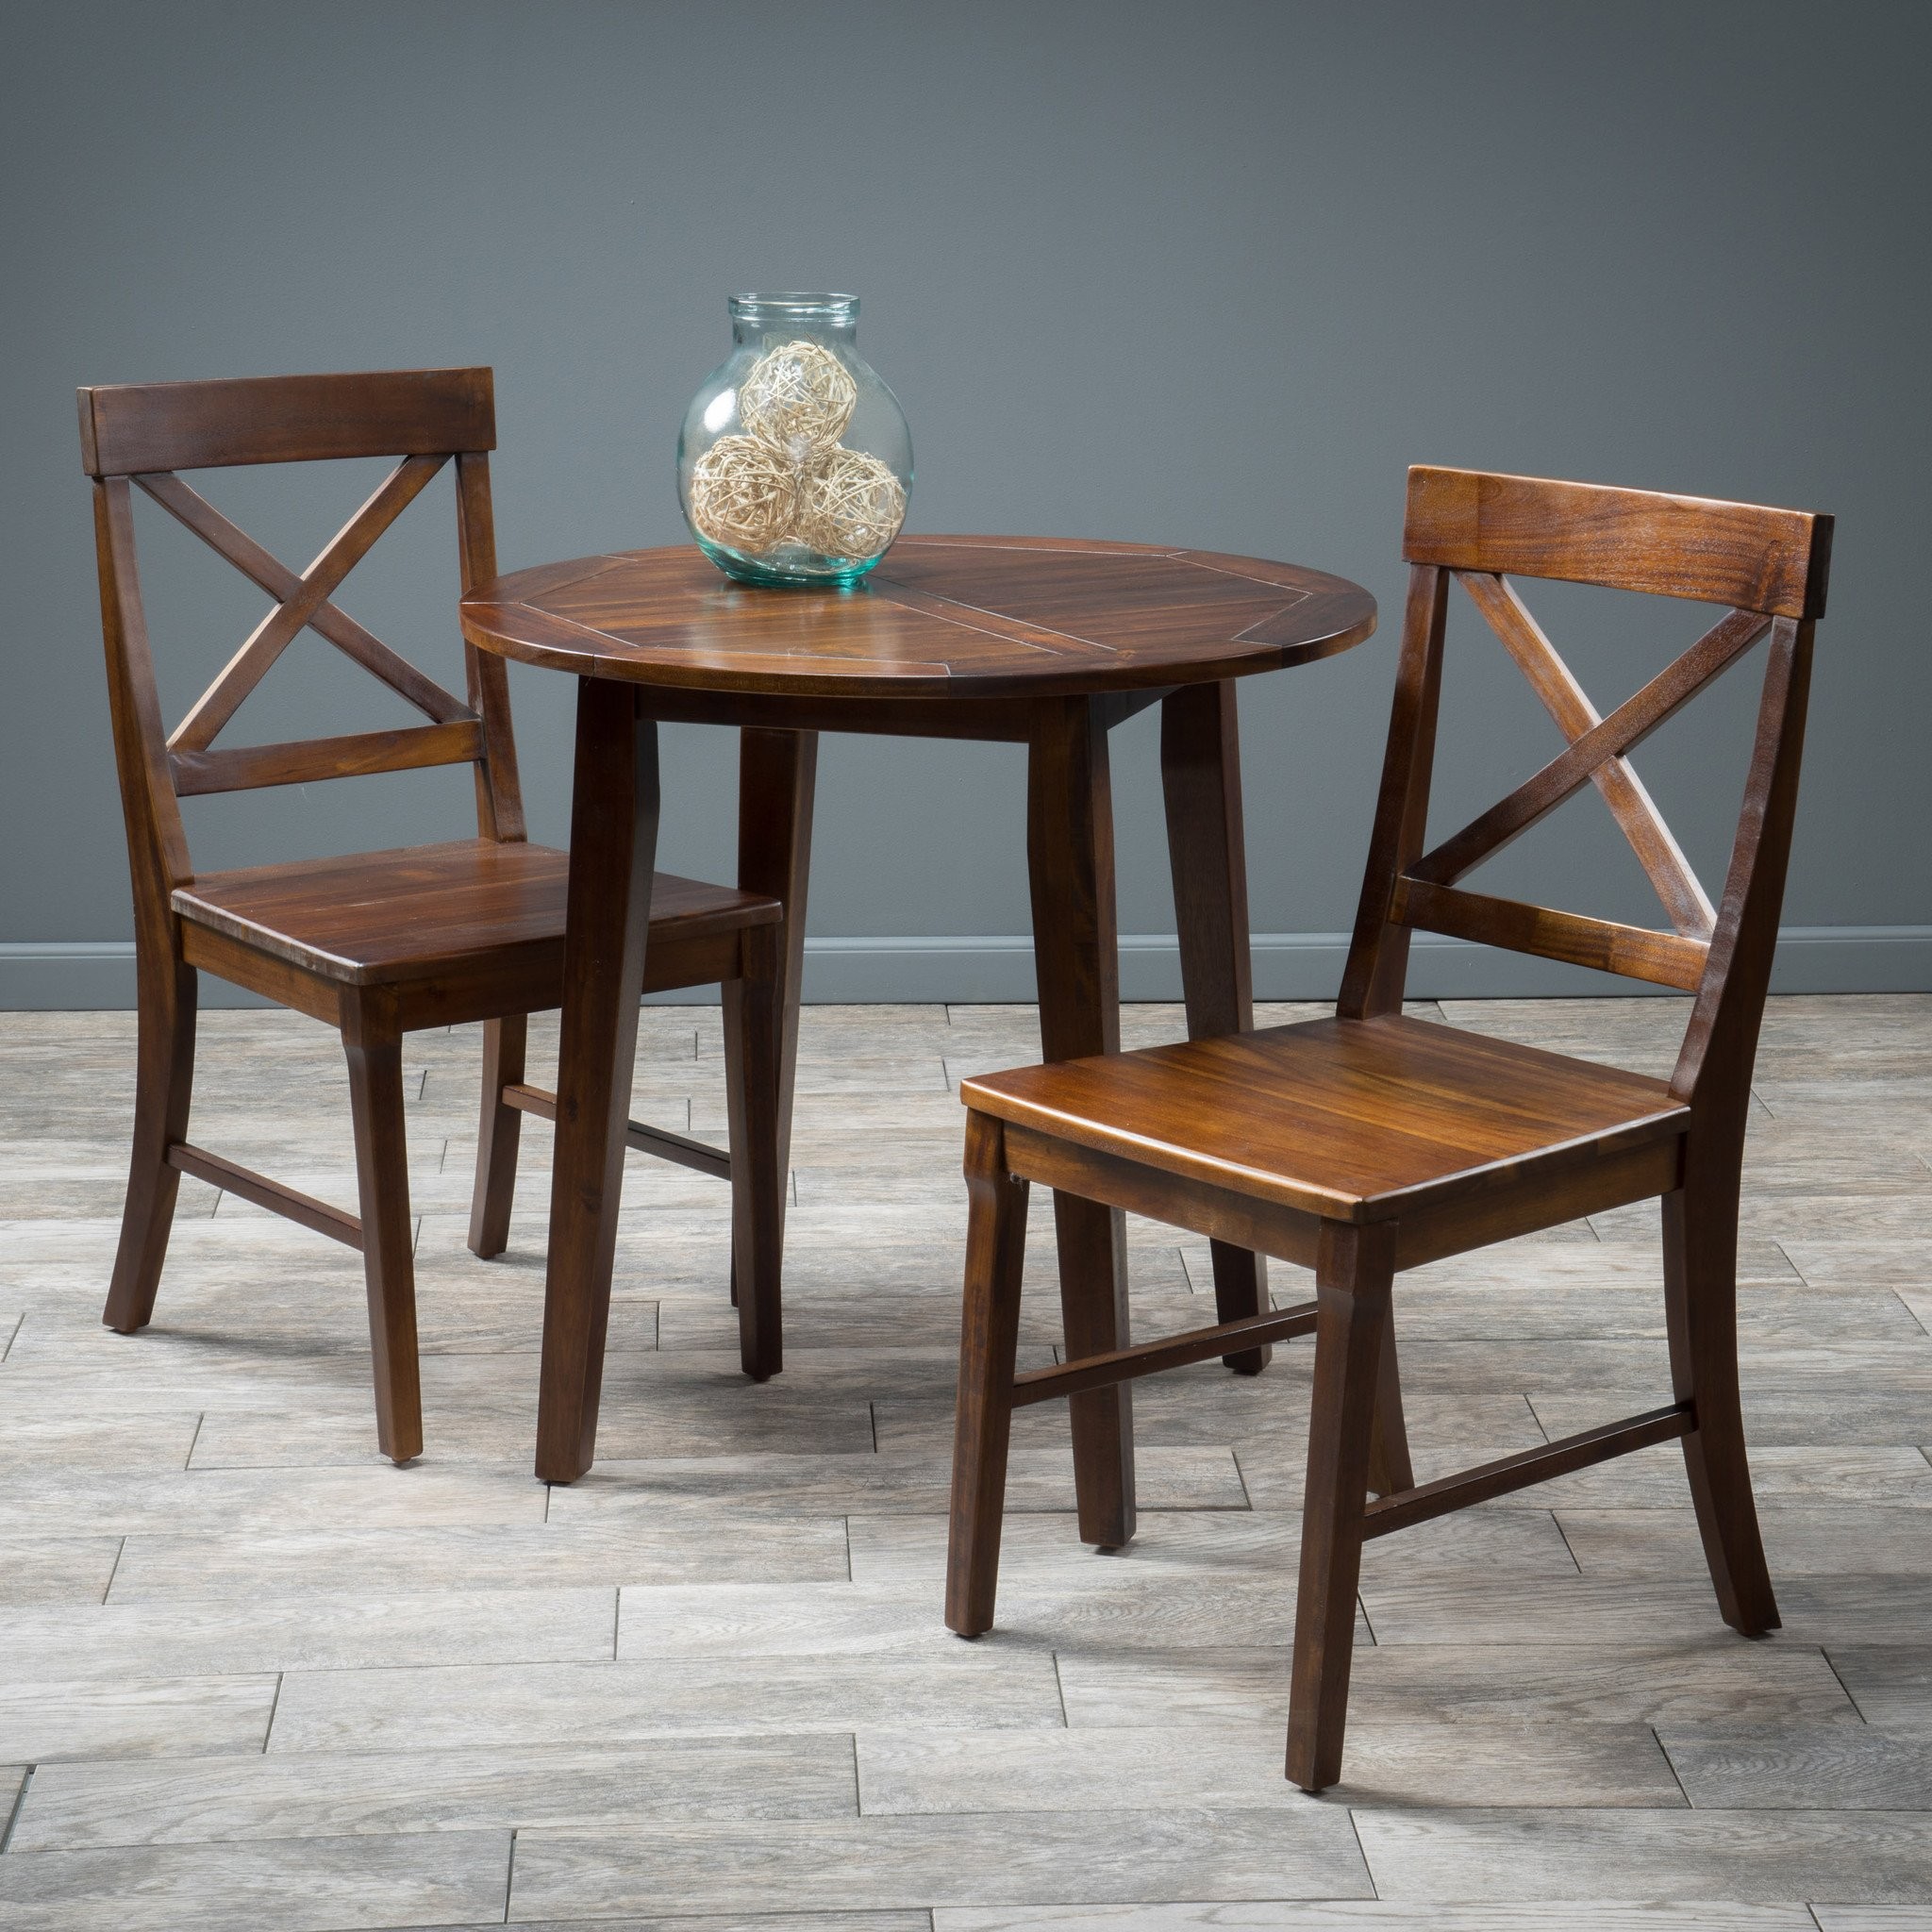 Potter 3pc Mahogany Stained Wood Round Table Dinin...